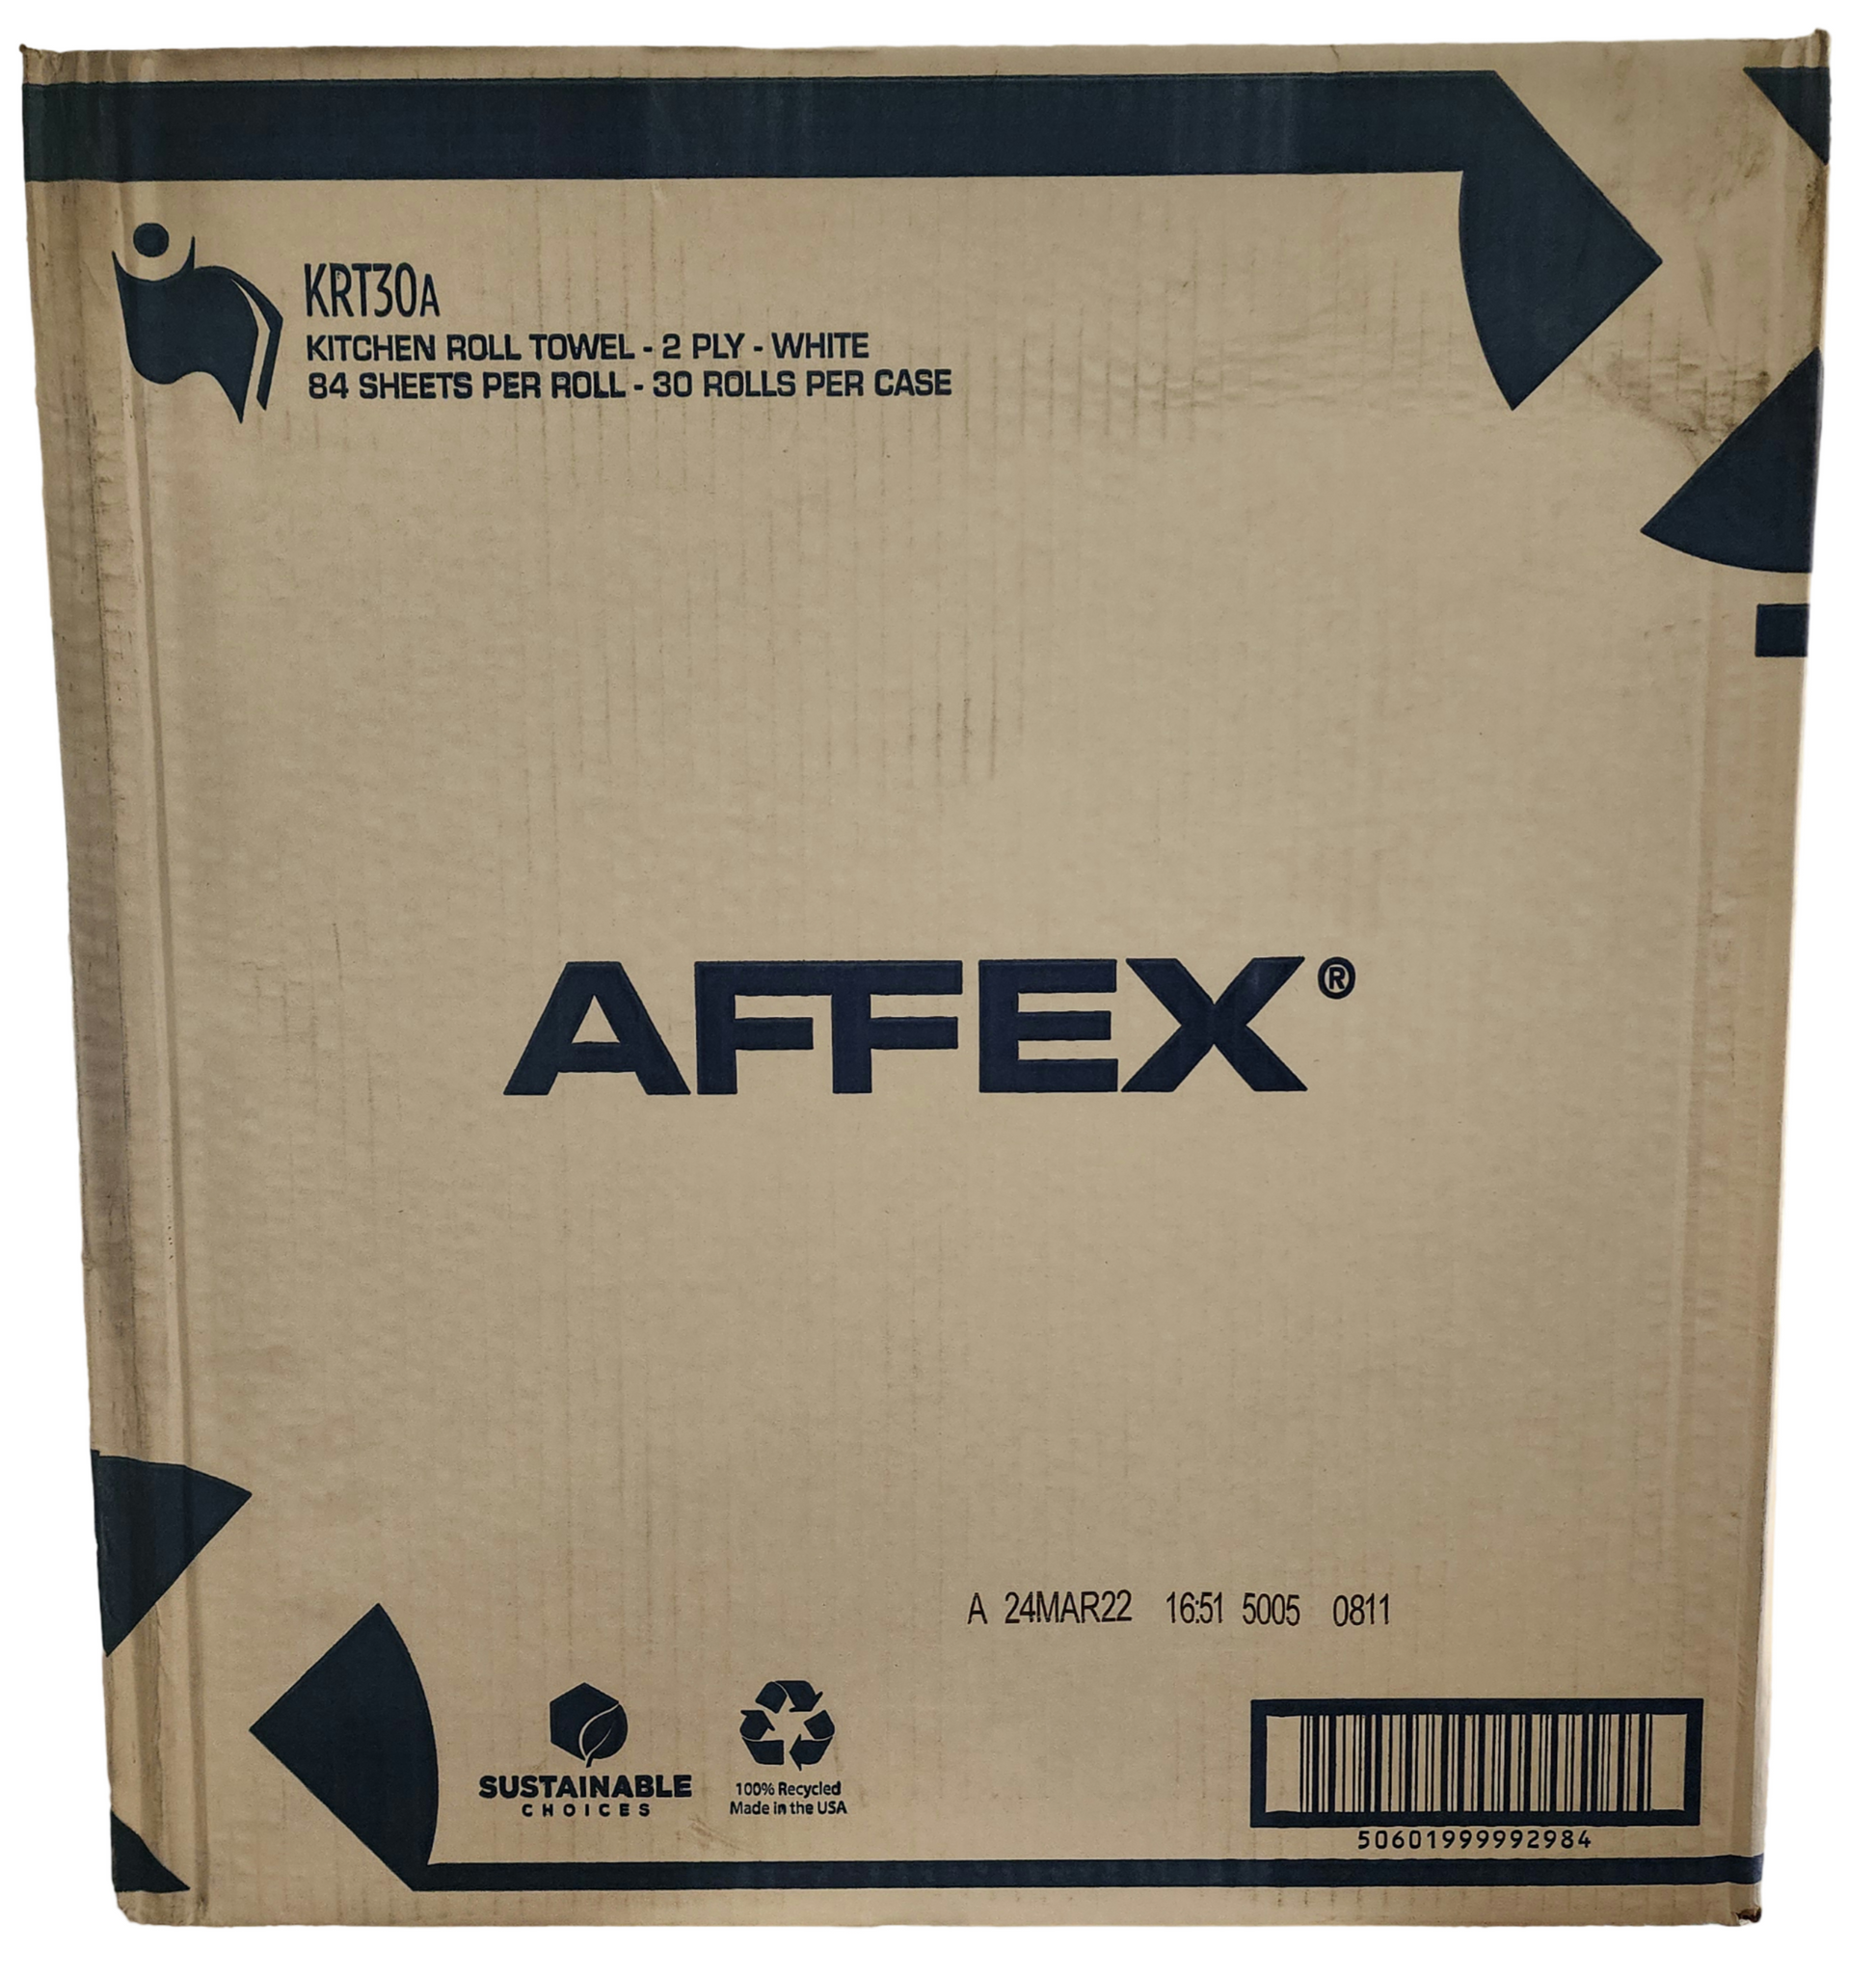 Affex 2 Ply Kitchen Roll Towel - 85 ct., White 30/Case